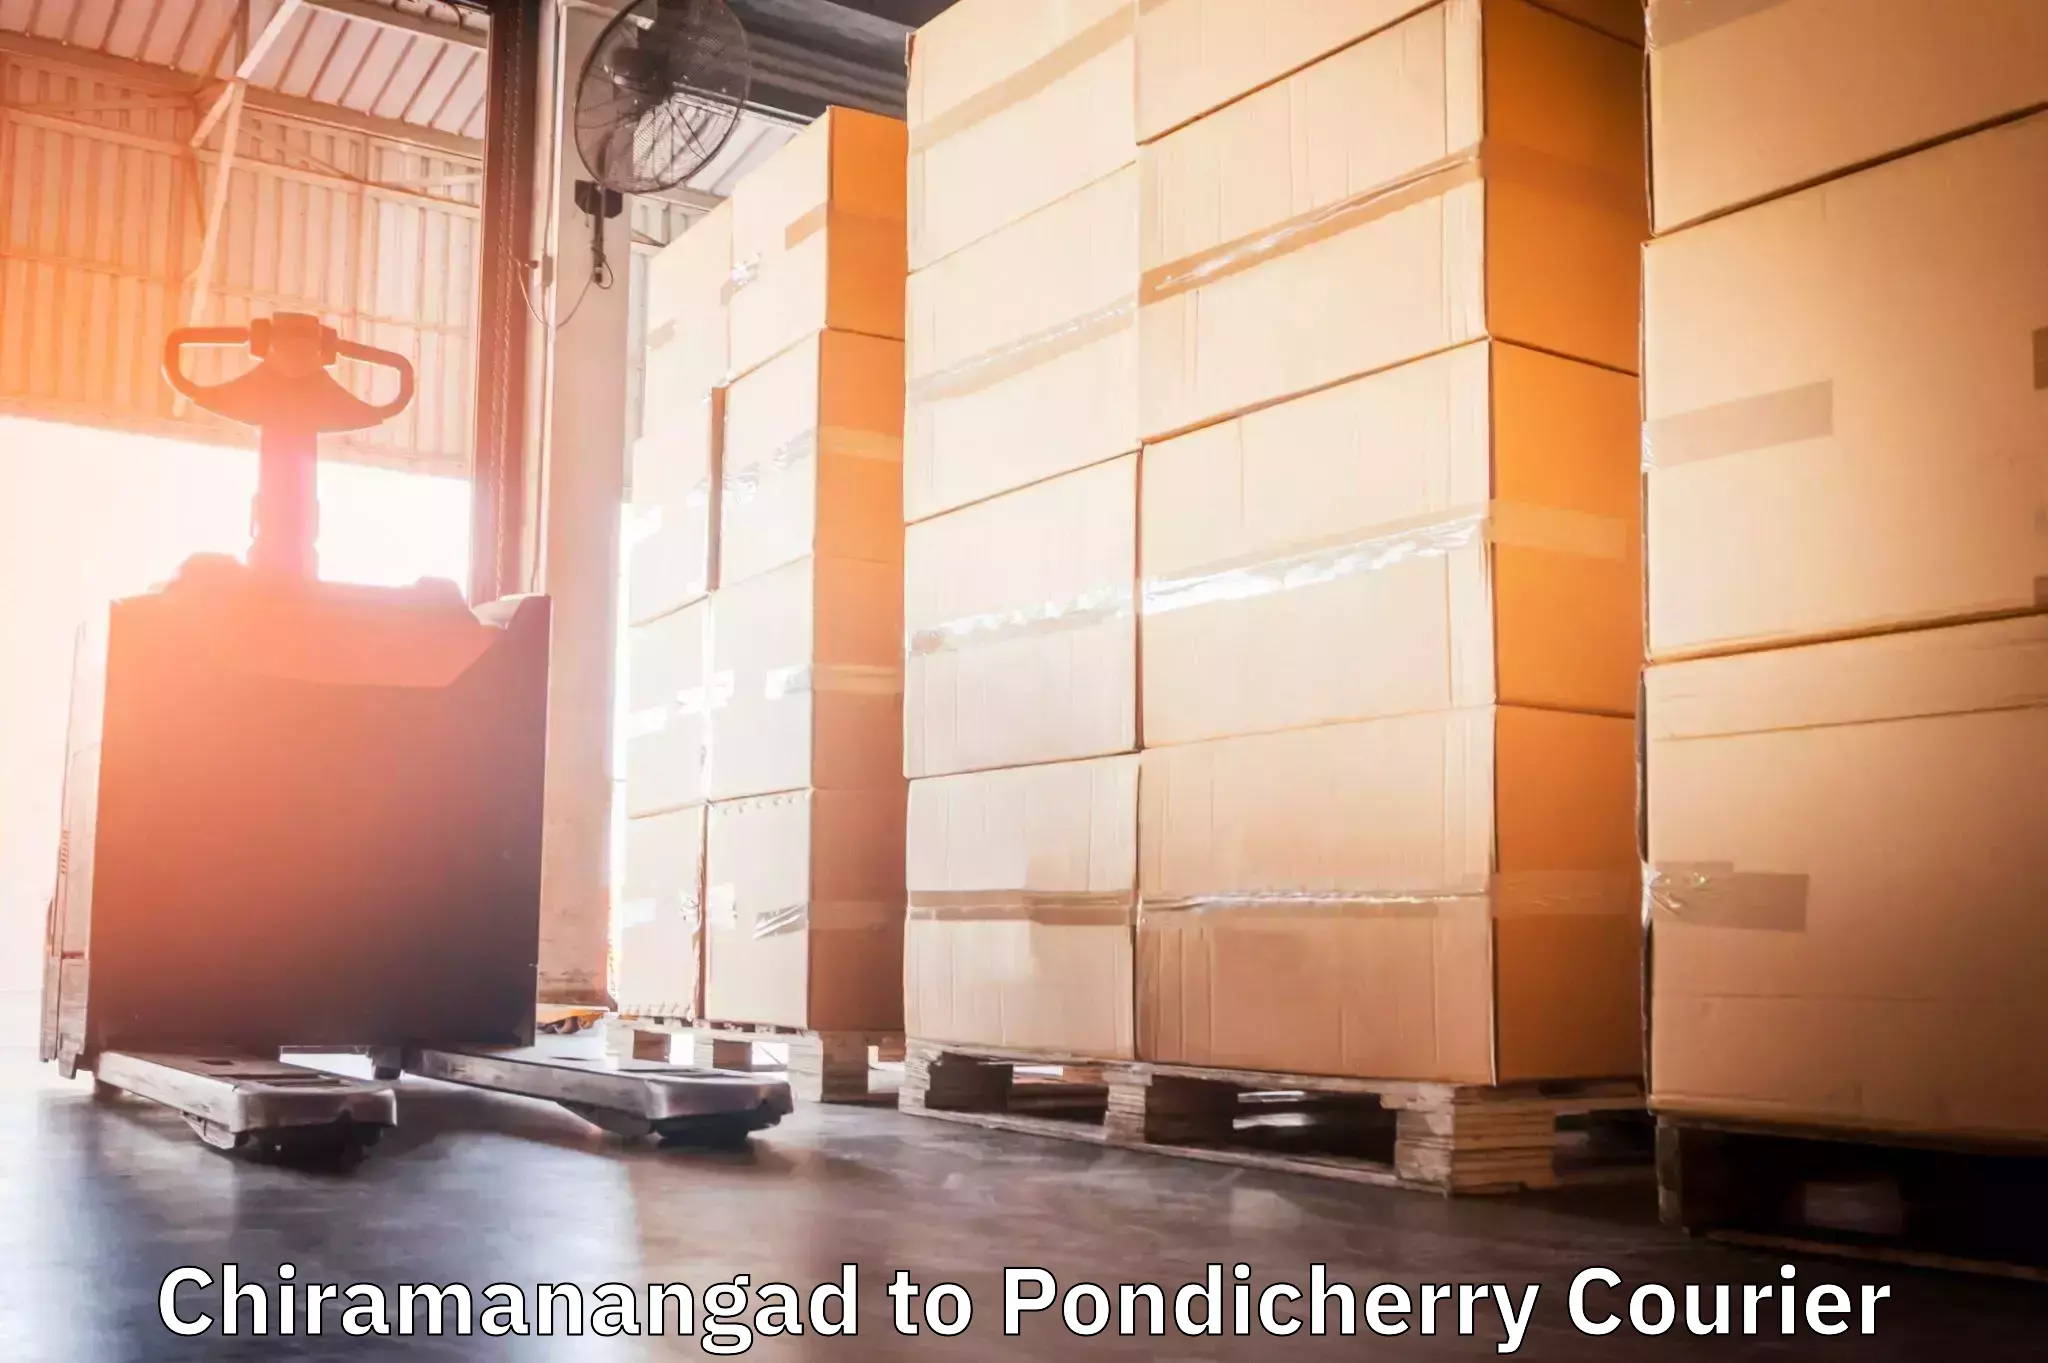 Overnight delivery services Chiramanangad to Pondicherry